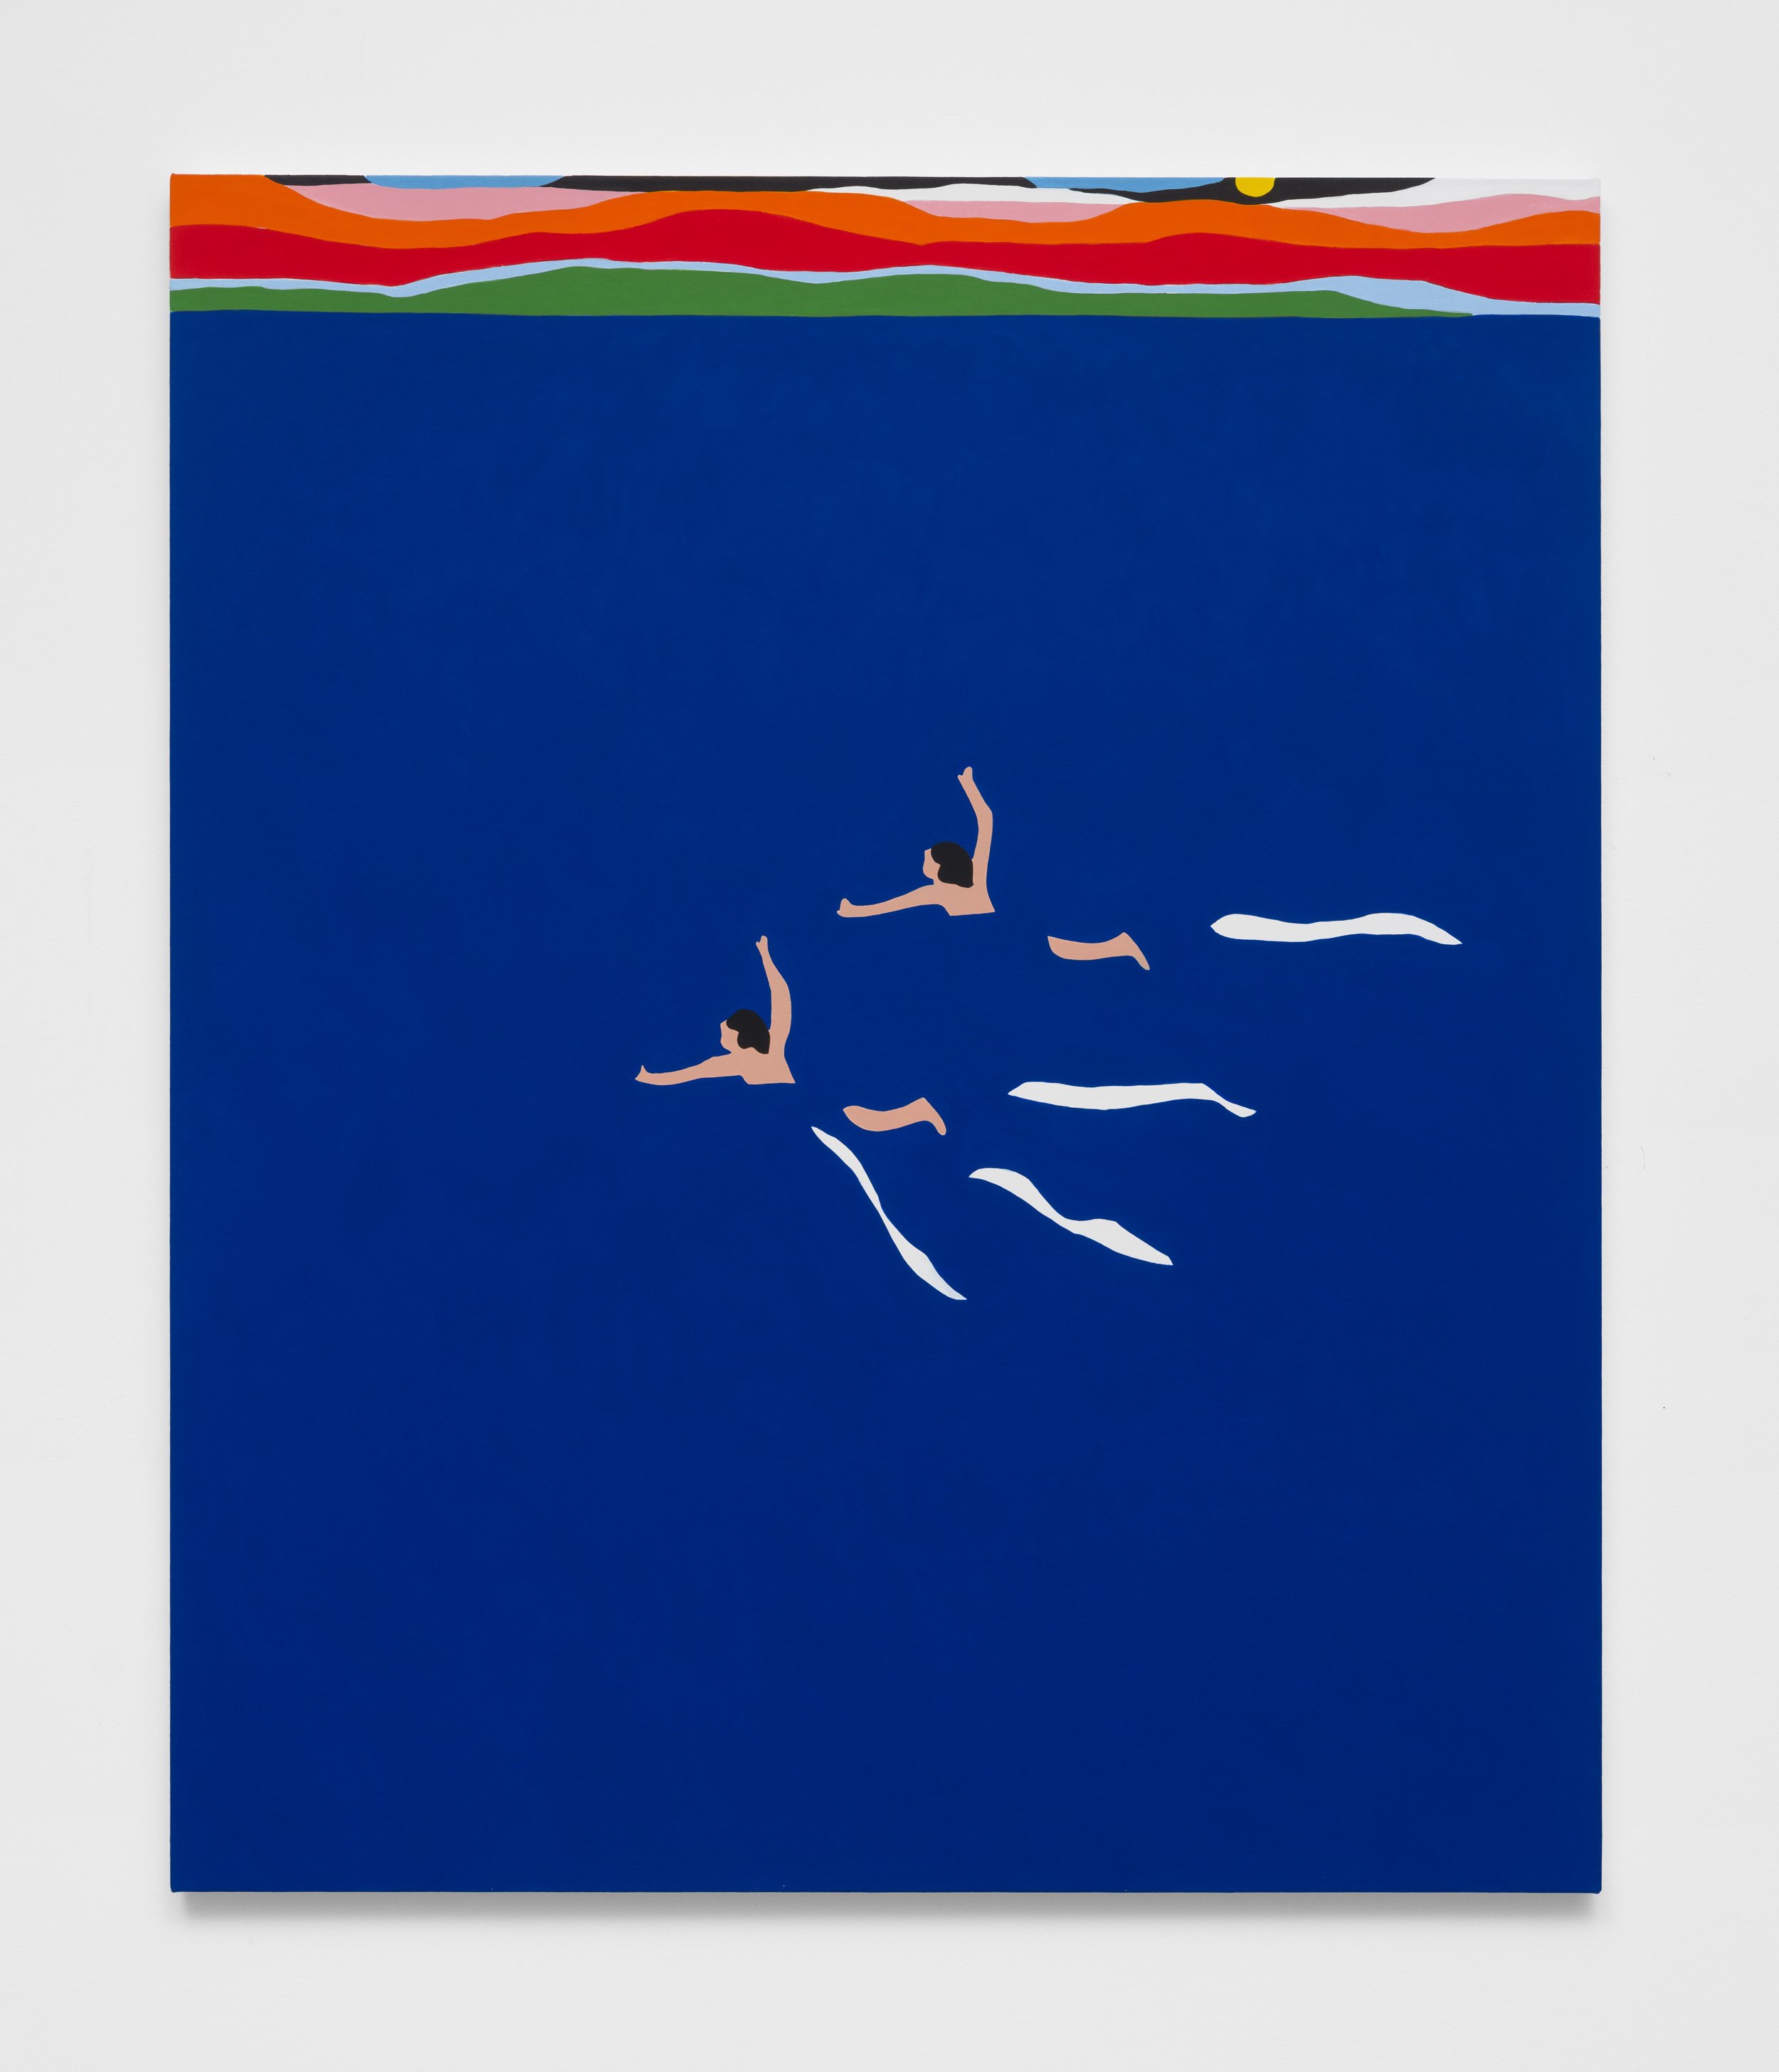  James Ulmer  Swimmers, 2023  Flashe on canvas  60 x 50 in. 